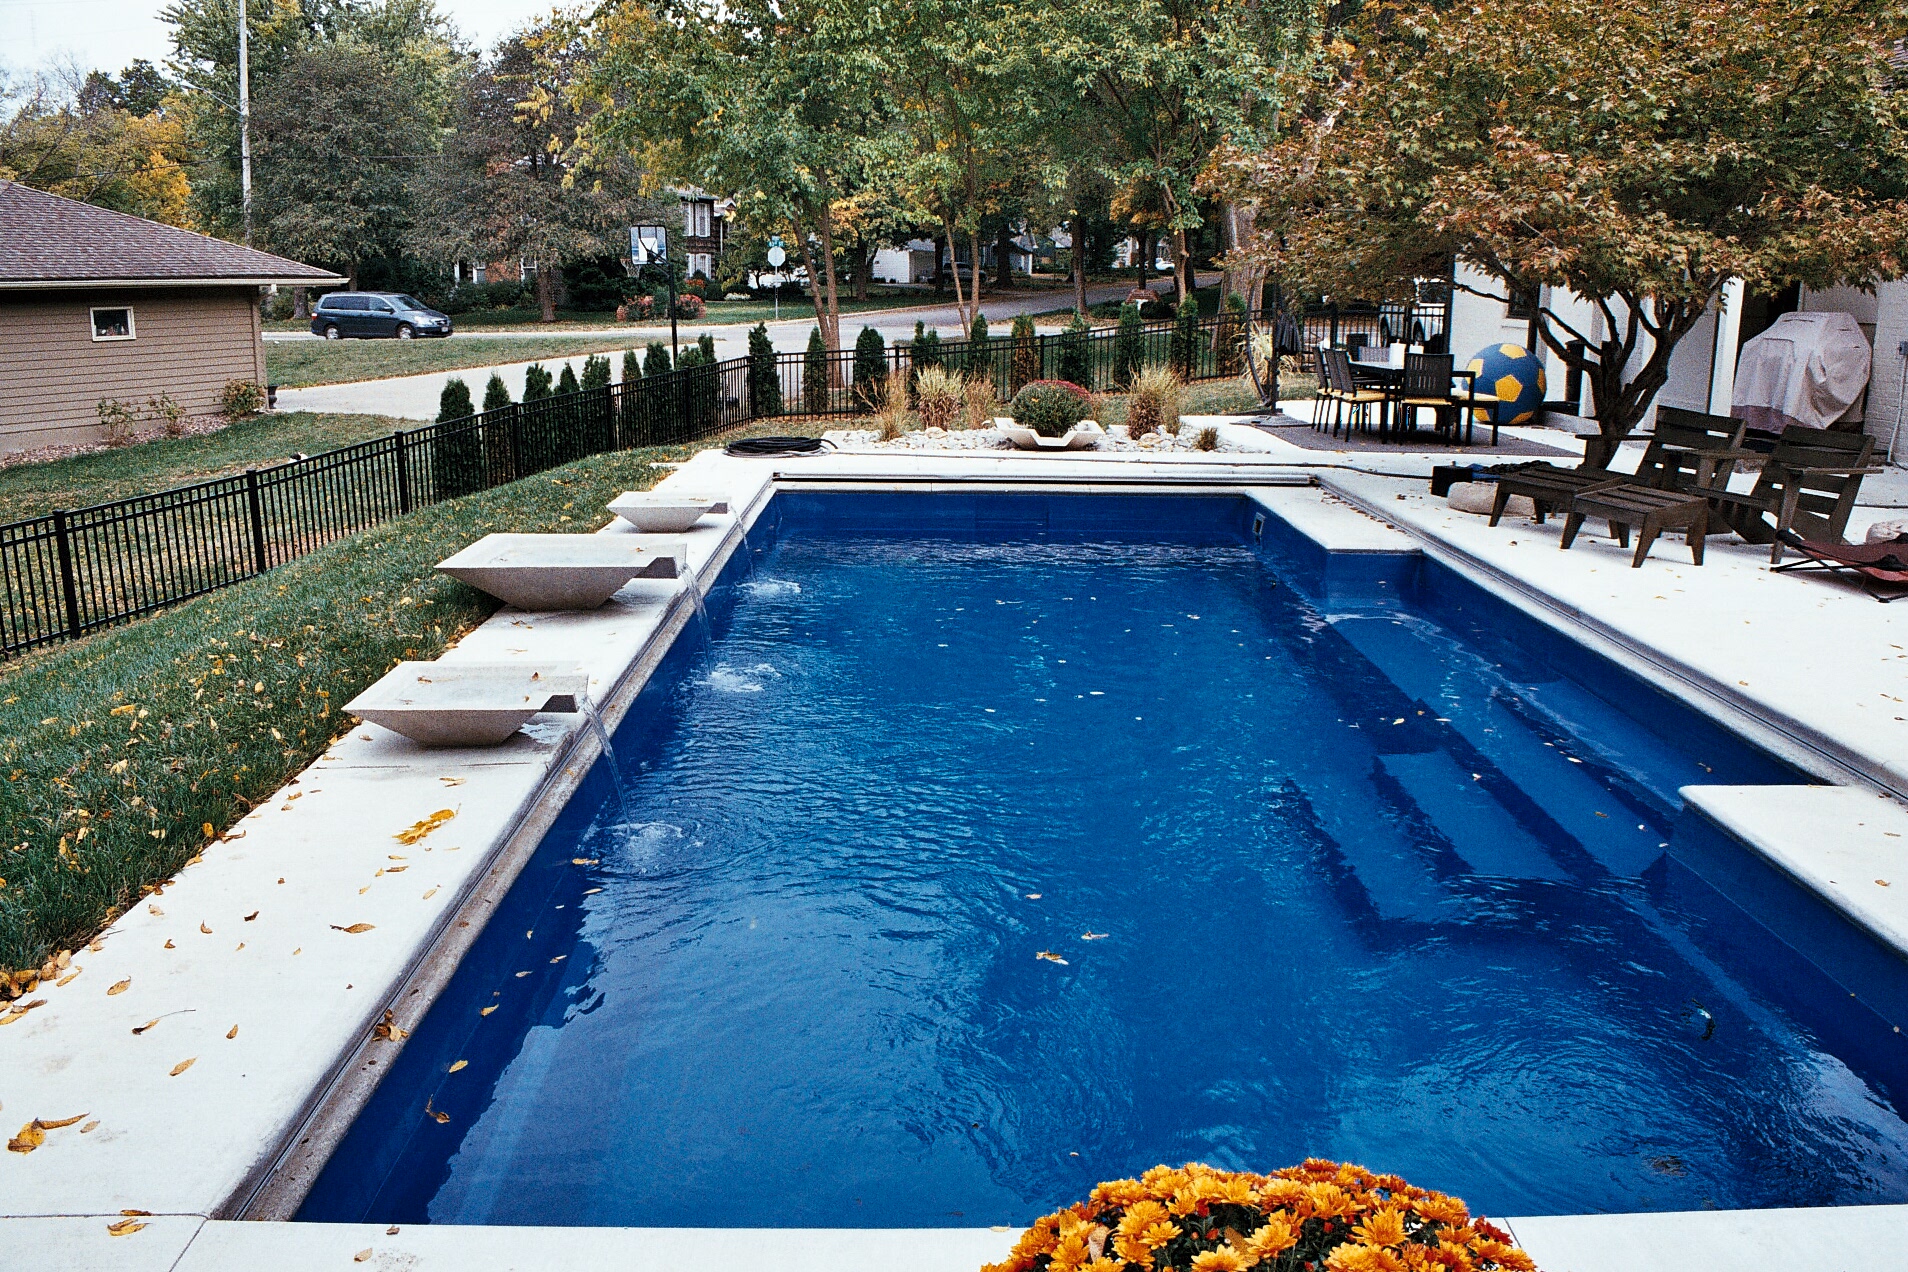 https://poolsbyyork.com/wp-content/uploads/2012/01/York-Pool-with-Fountains.jpg